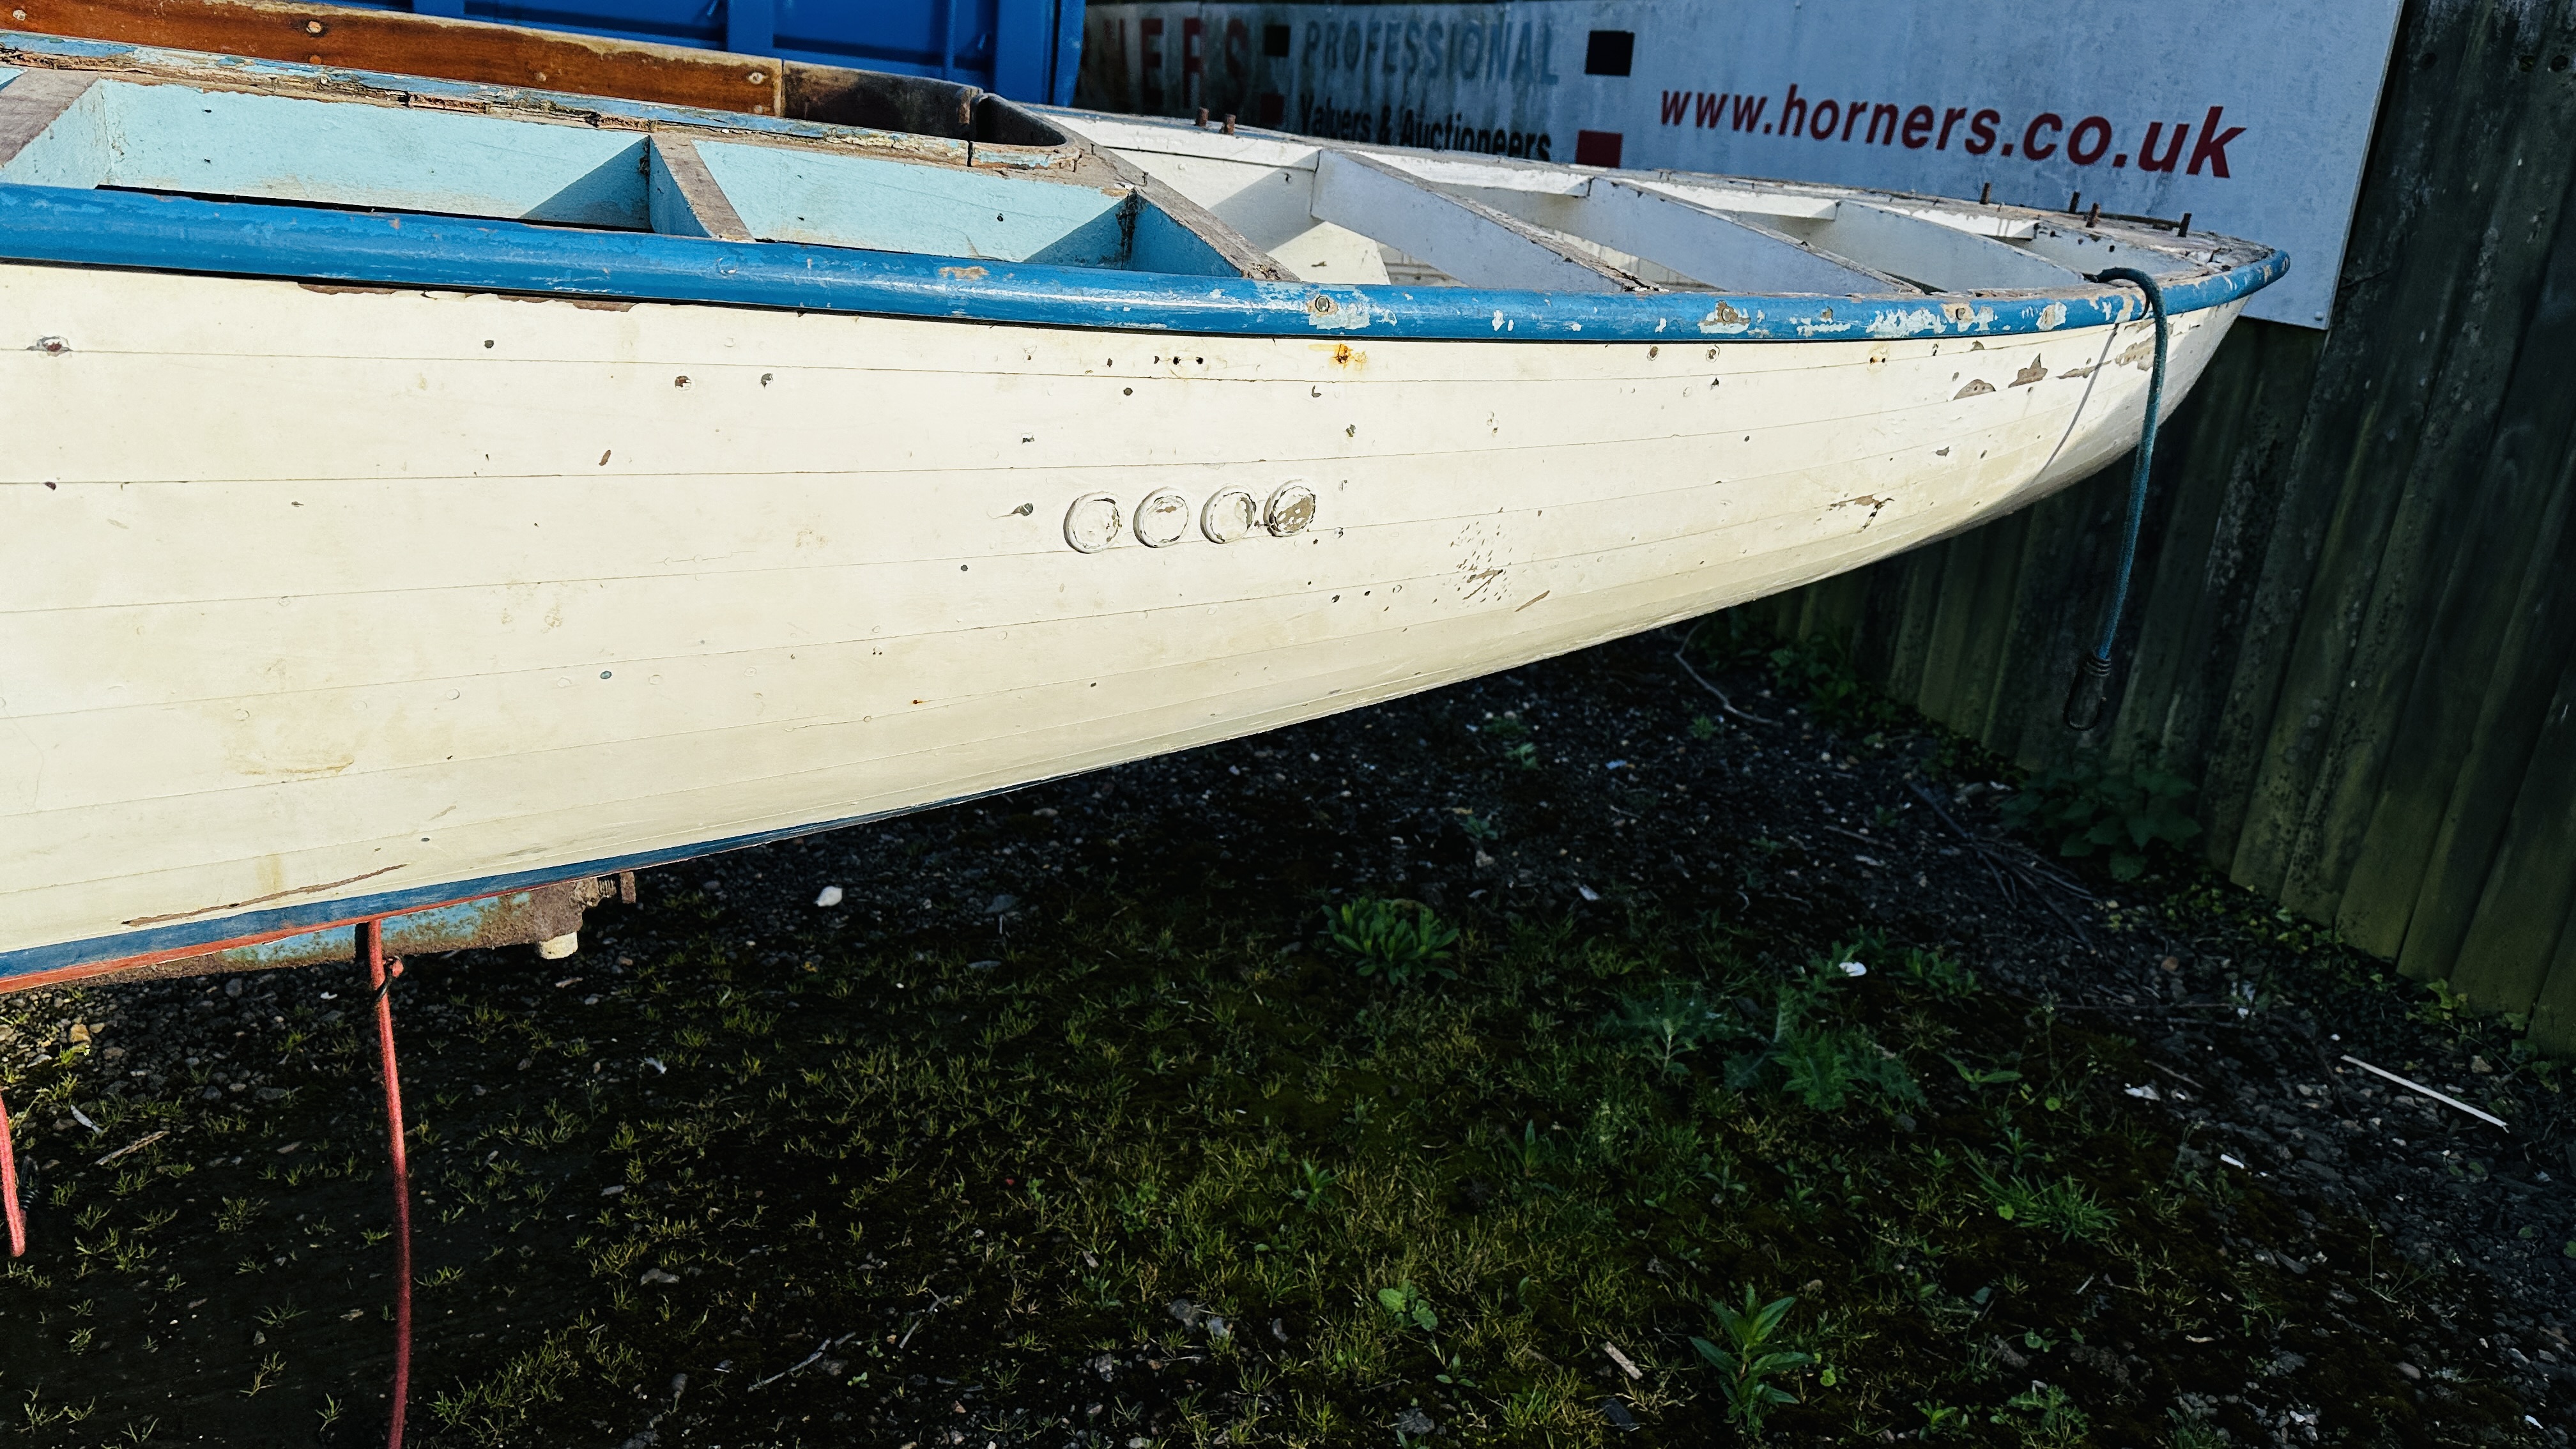 A WW2 UFFA FOX RESCUE BOAT BELIEVED TO BE BUILT BY TAYLOR WOODROW, STAMPED AW11, 1 OF 402 MADE, - Image 38 of 56